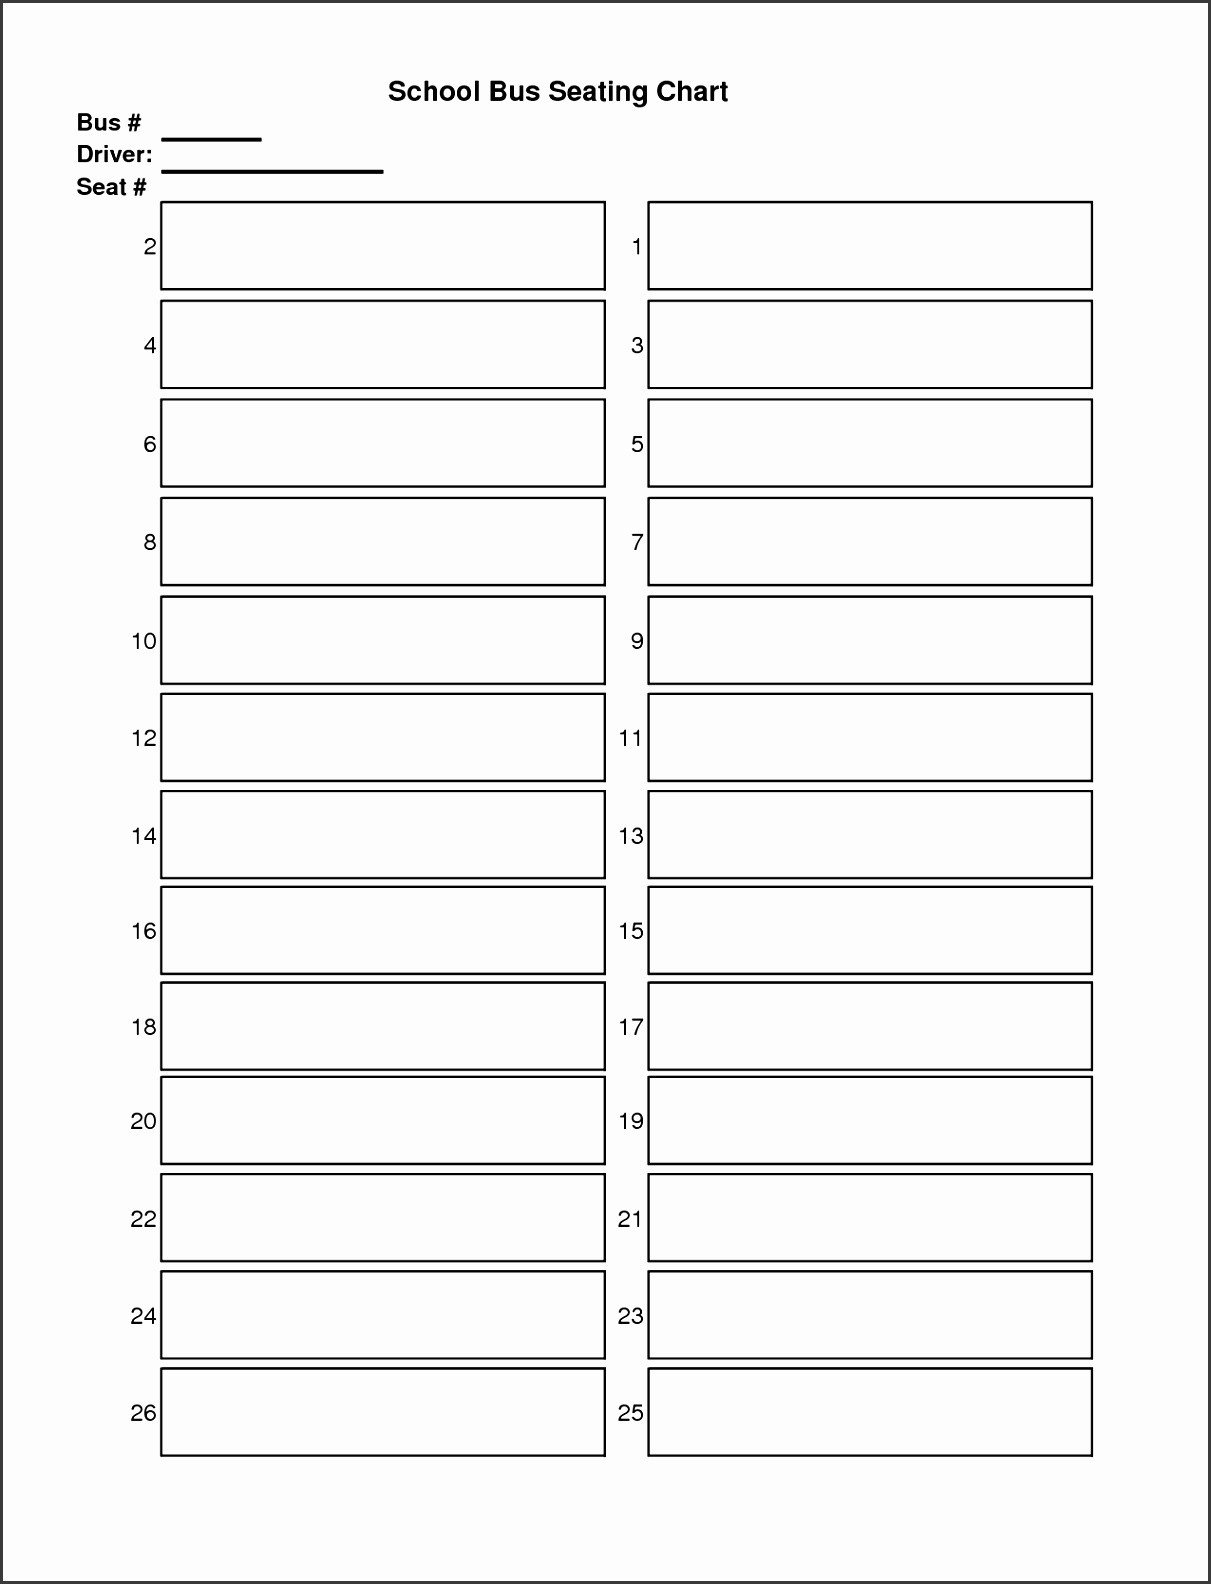 Cafeteria Seating Chart Template 8 Restaurant Seating Chart Template Sampletemplatess